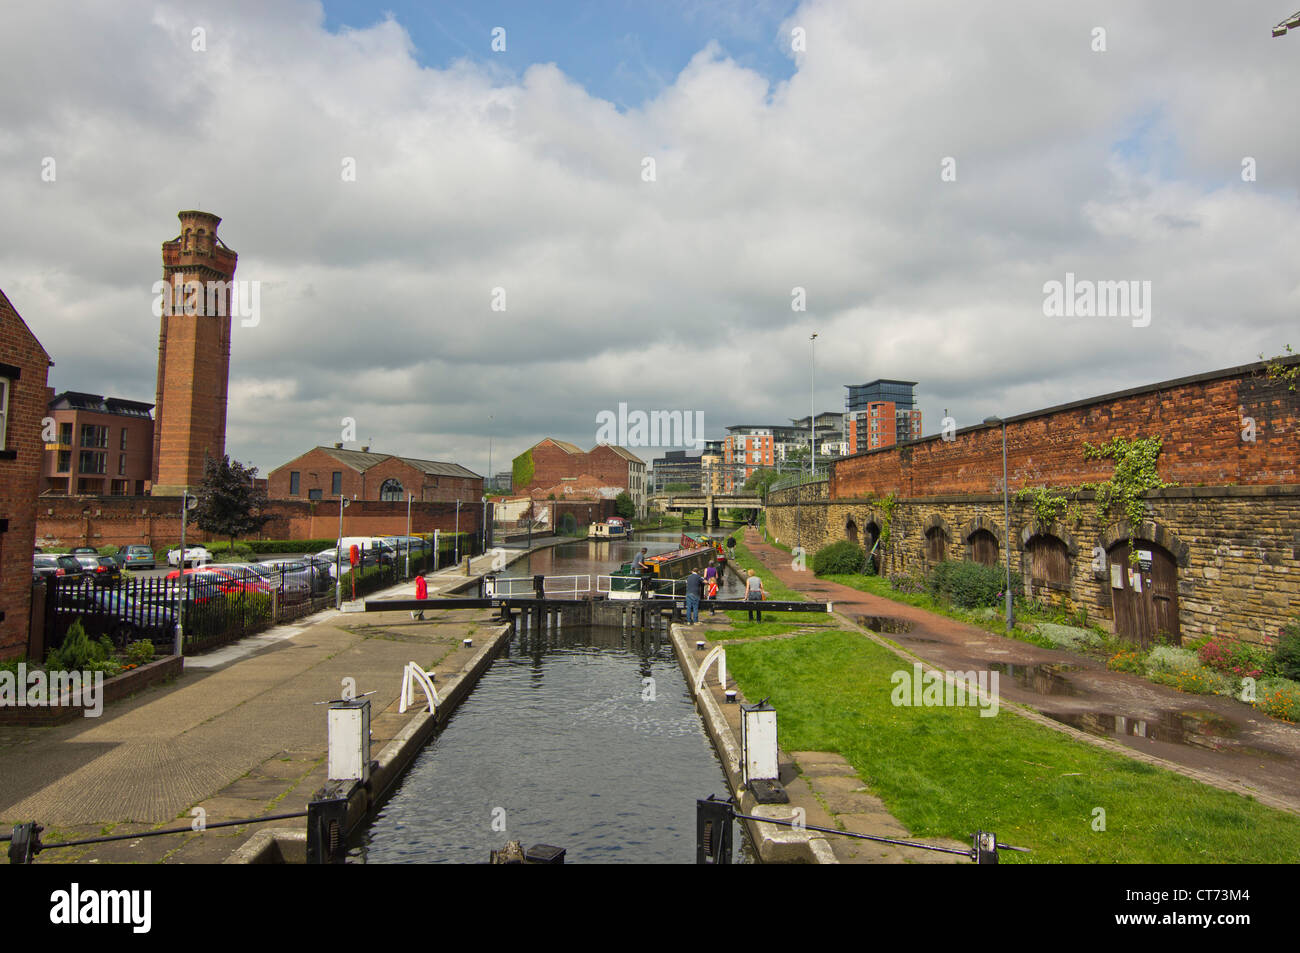 Canal boats going through one of the Locks on the Leeds & Liverpool canal in the center of Leeds Stock Photo